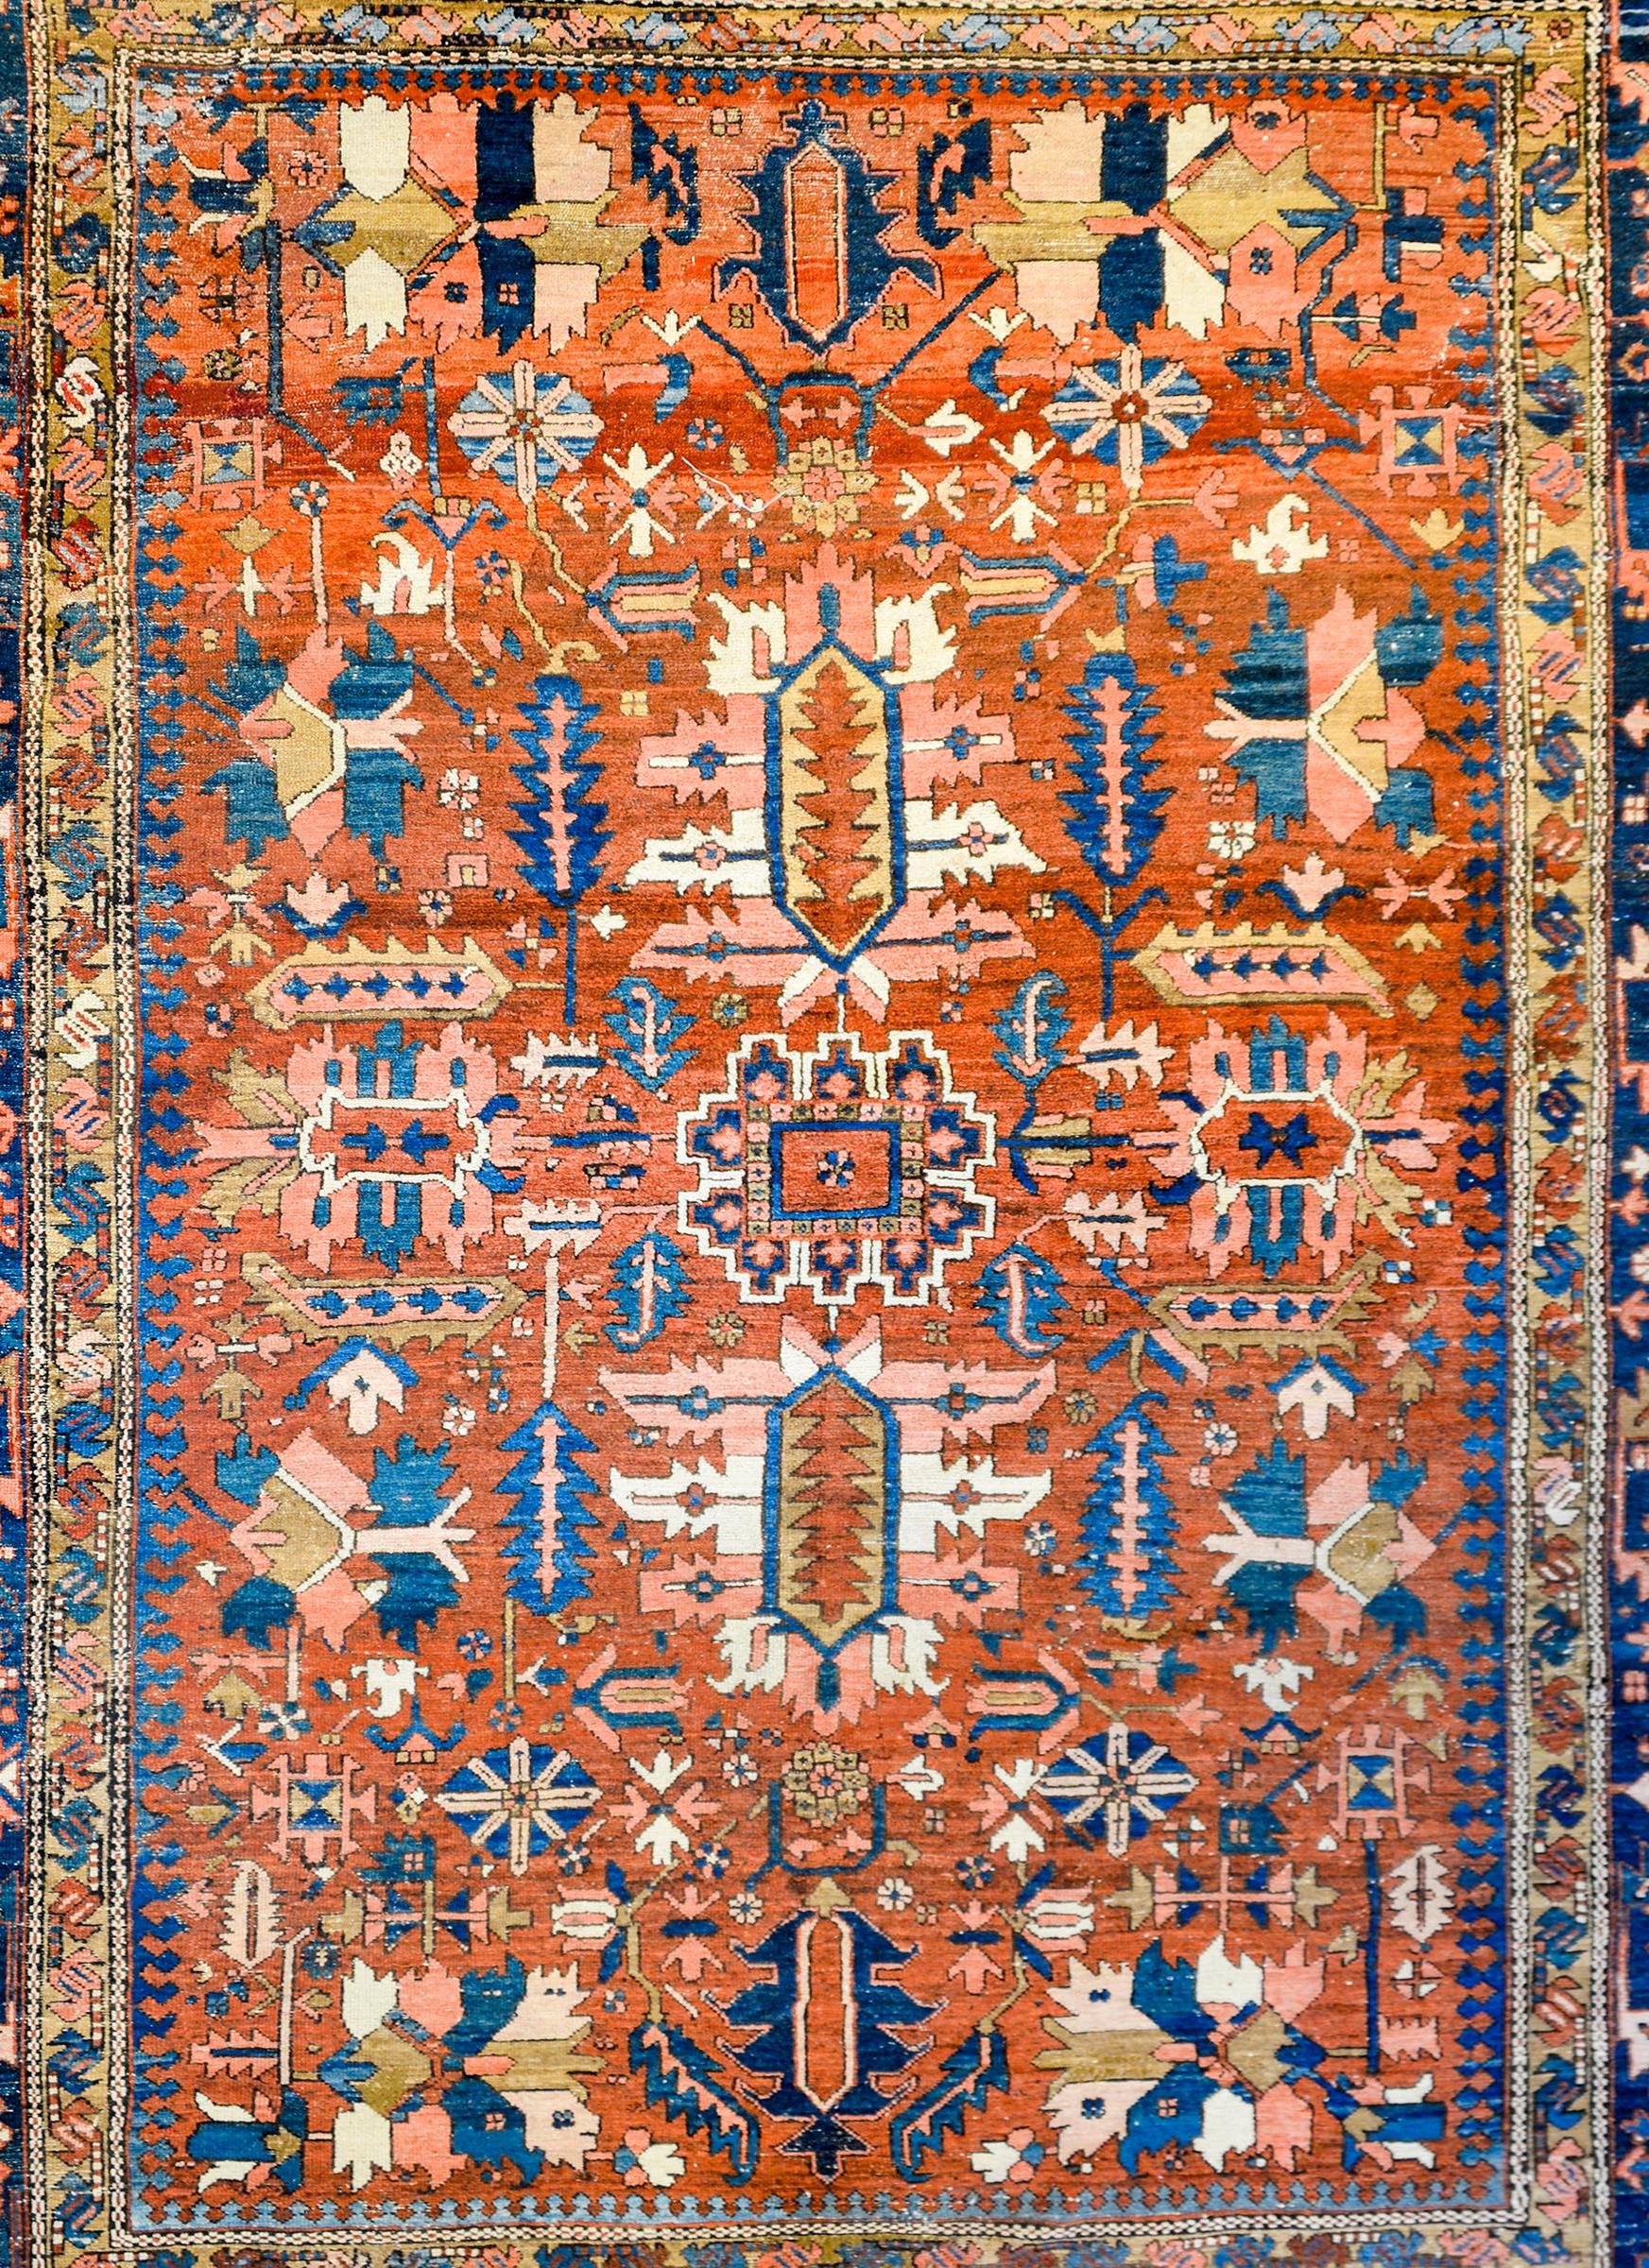 An incredible late 19th century Persian Bakhshyesh rug with a bold all-over tribal pattern of stylized flowers and leaves woven in crimson, light and dark indigo, pink, and white vegetable dyed wool, on a brilliant crimson background. The border is